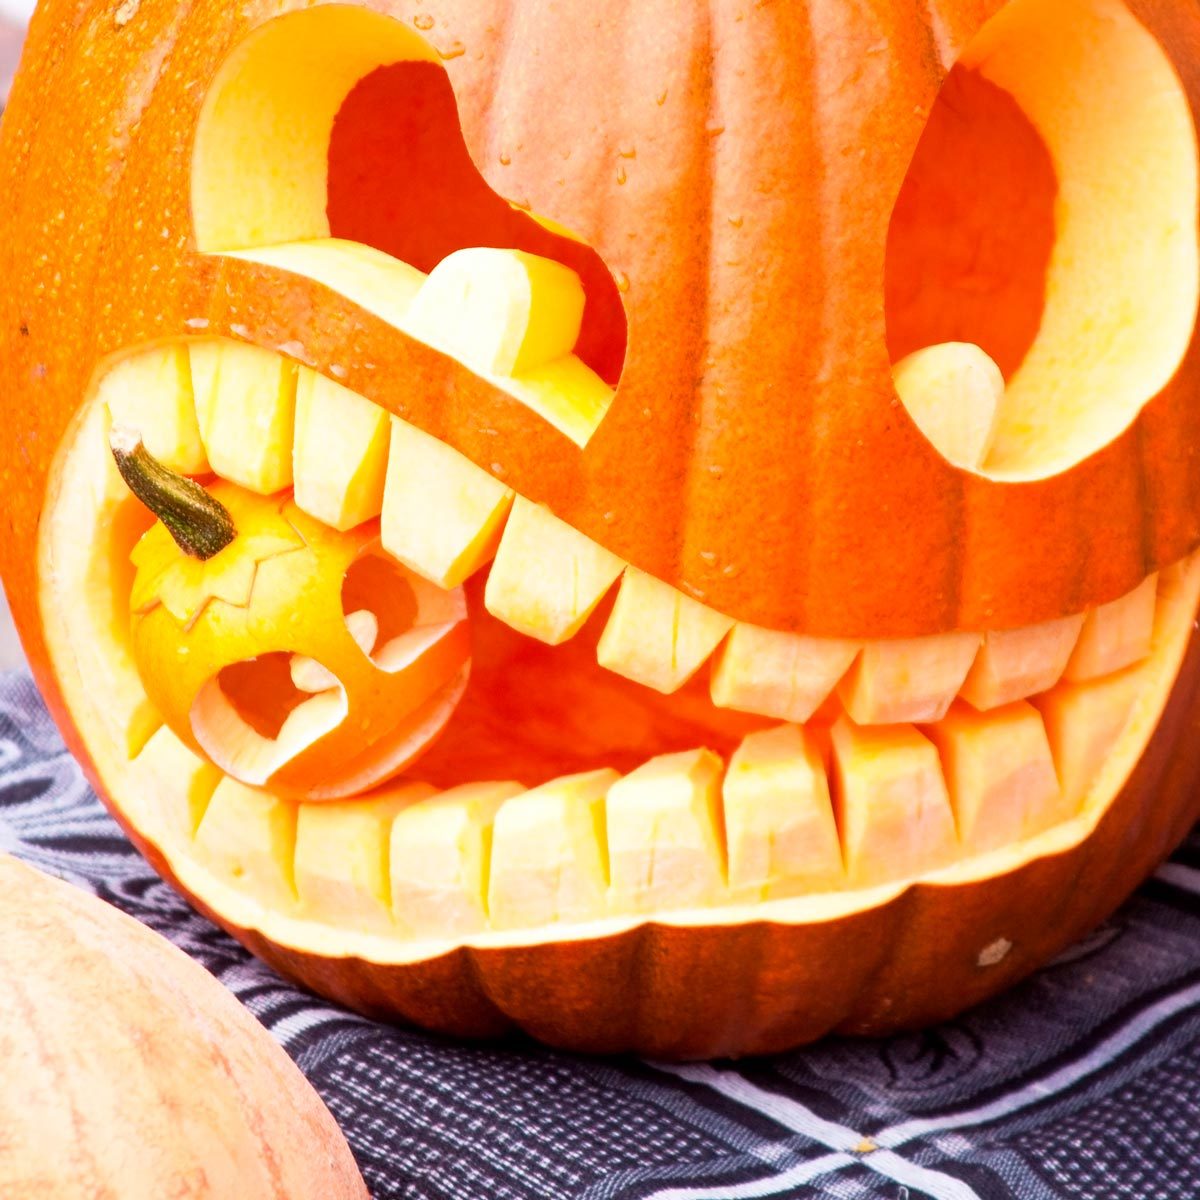 20 Pumpkin Carving Ideas To Inspire You This Halloween Reader S Digest